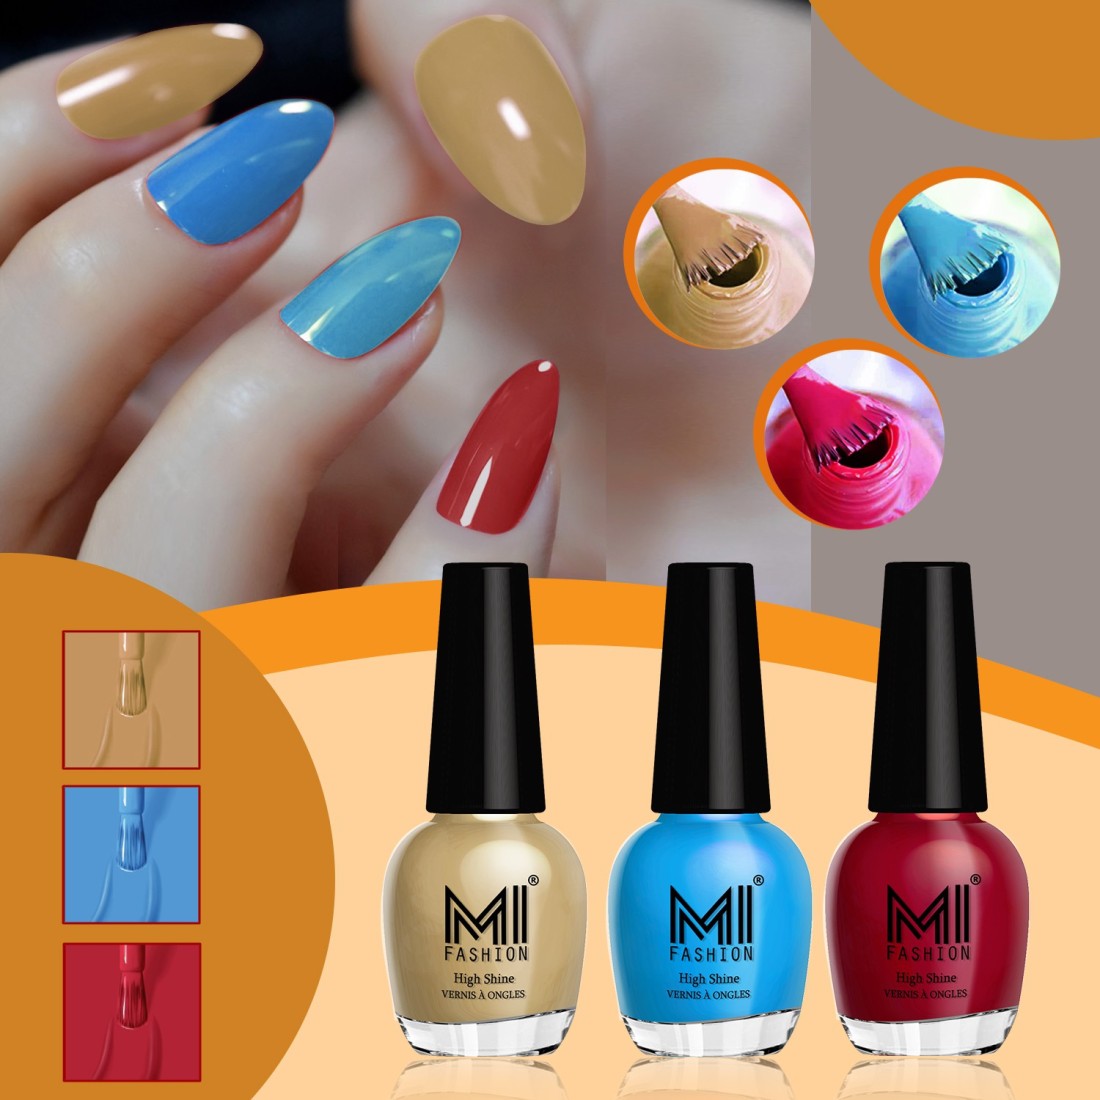 Buy FORFOR® Trendy Glossy Nail Polish | Fast Dry & Nail Art Combo of 6  (Aqua Green,Transparent,White Lily,Neon Lemon,Light Green,Charcoal Black)  Online at Low Prices in India - Amazon.in